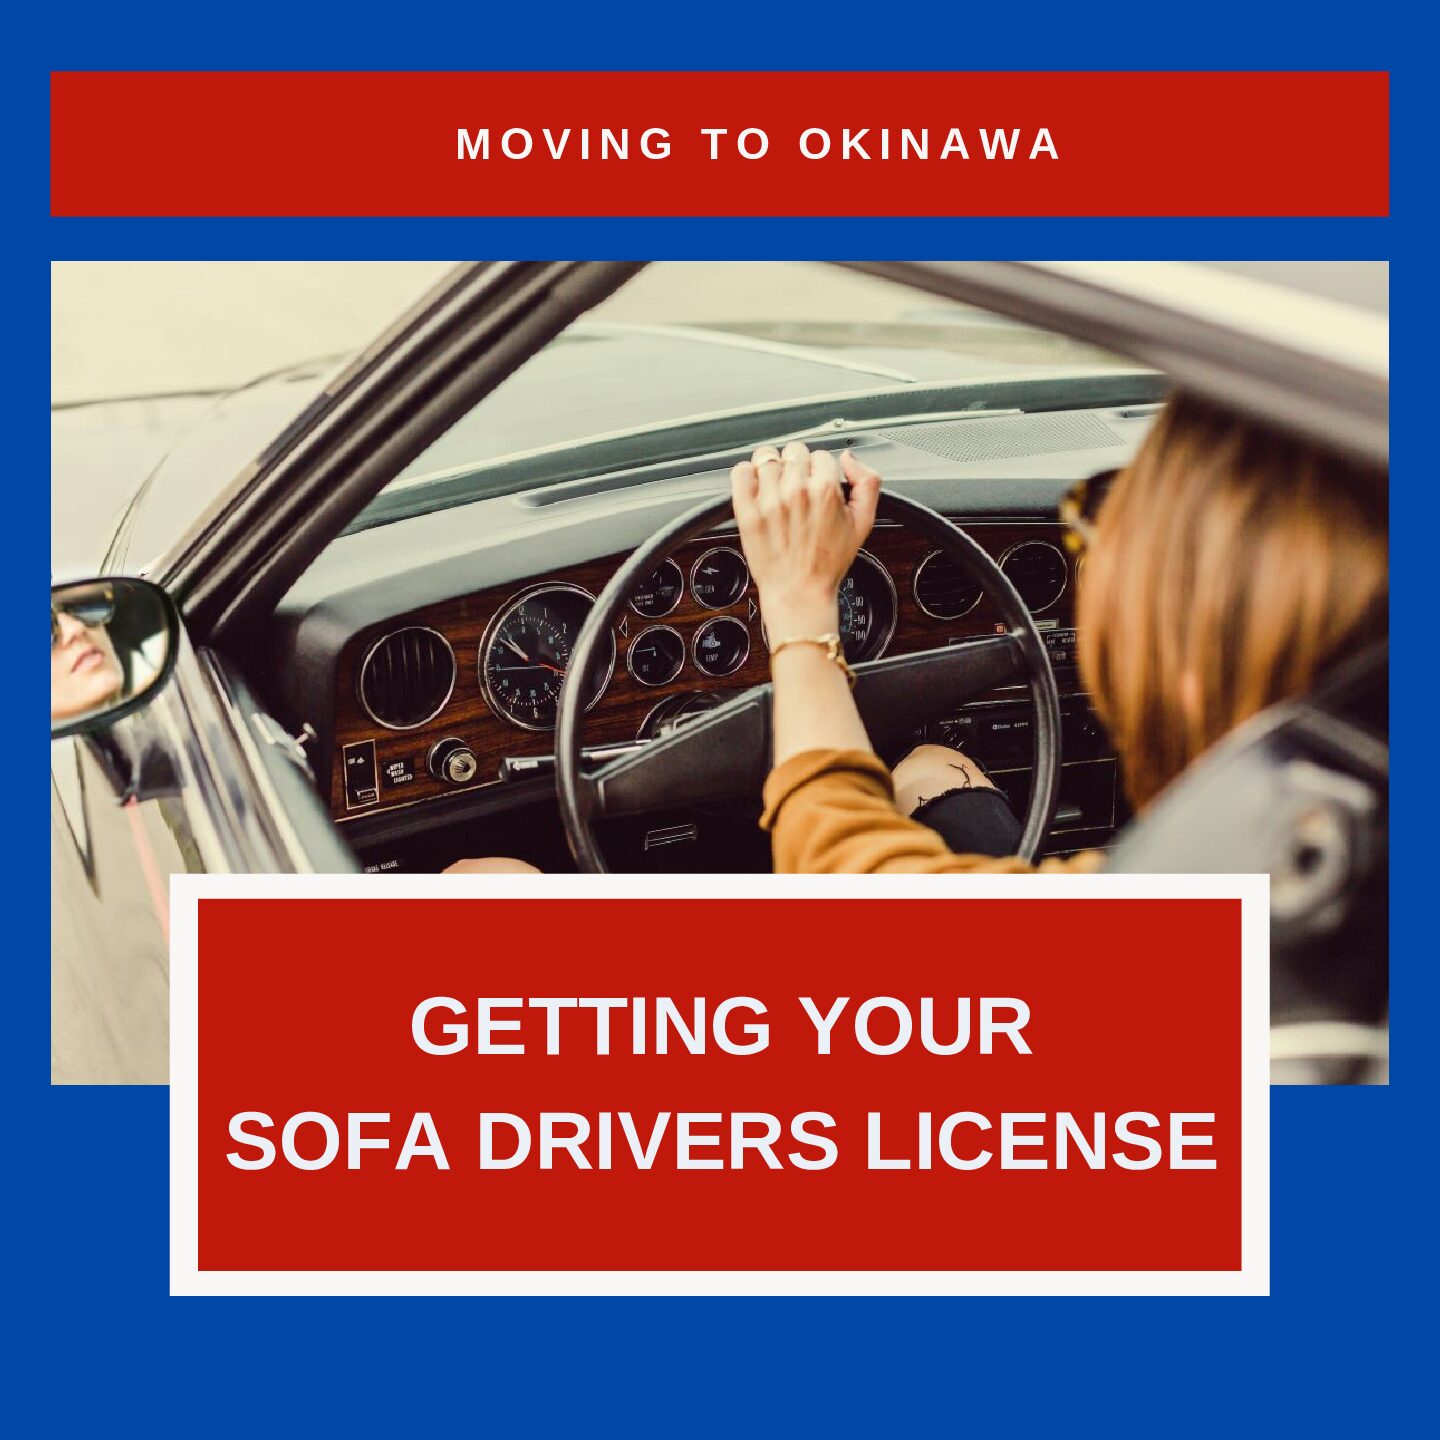 Getting Your SOFA Drivers License as an Air Force Family